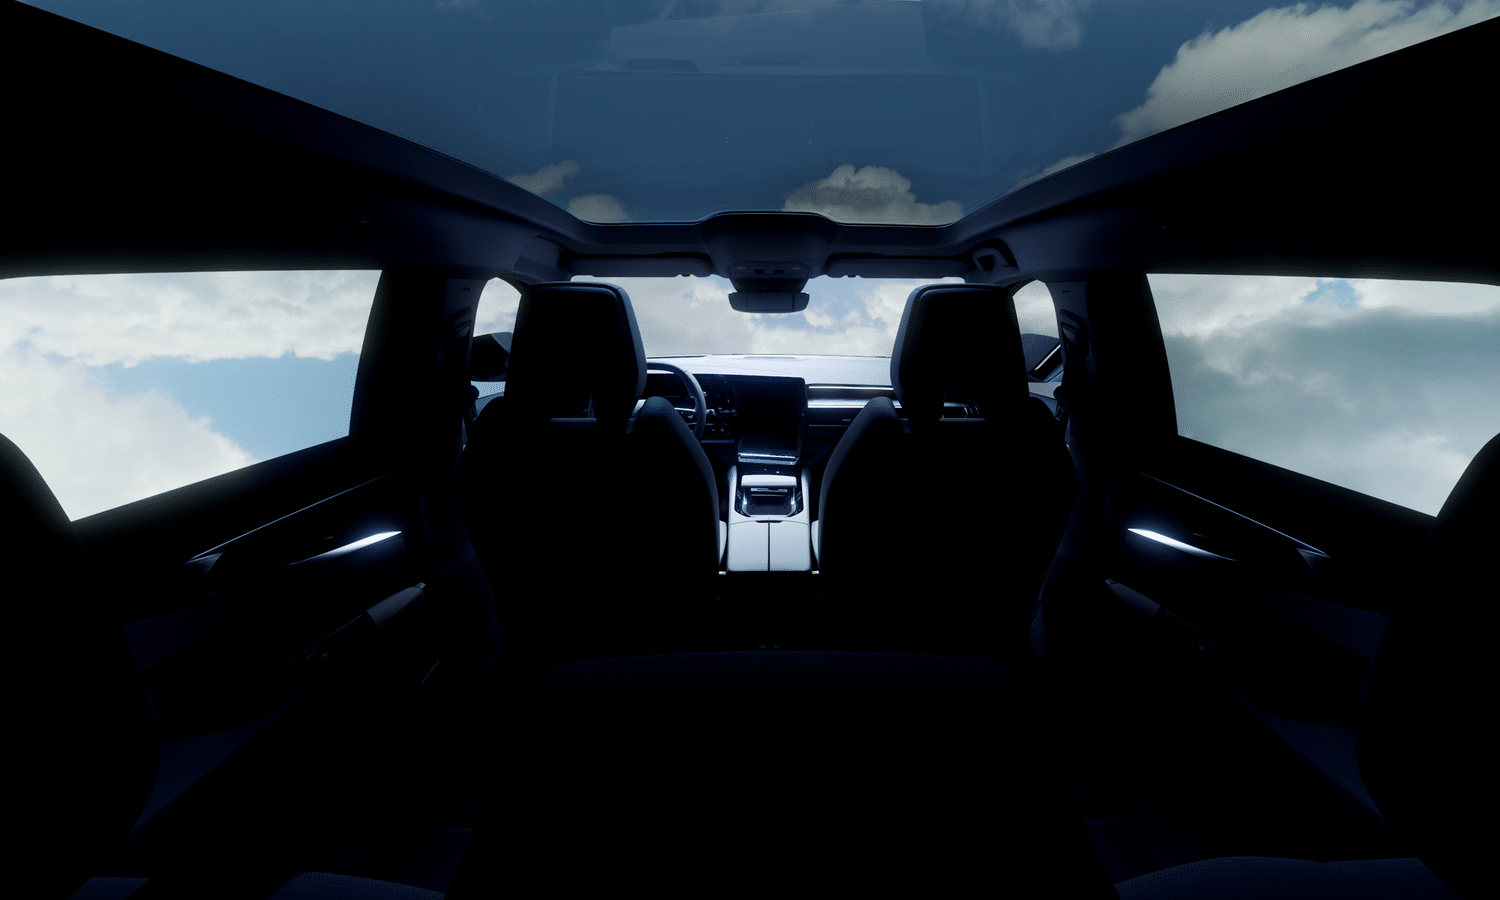 All-new Renault Espace an immense panoramic glass roof larger than any other